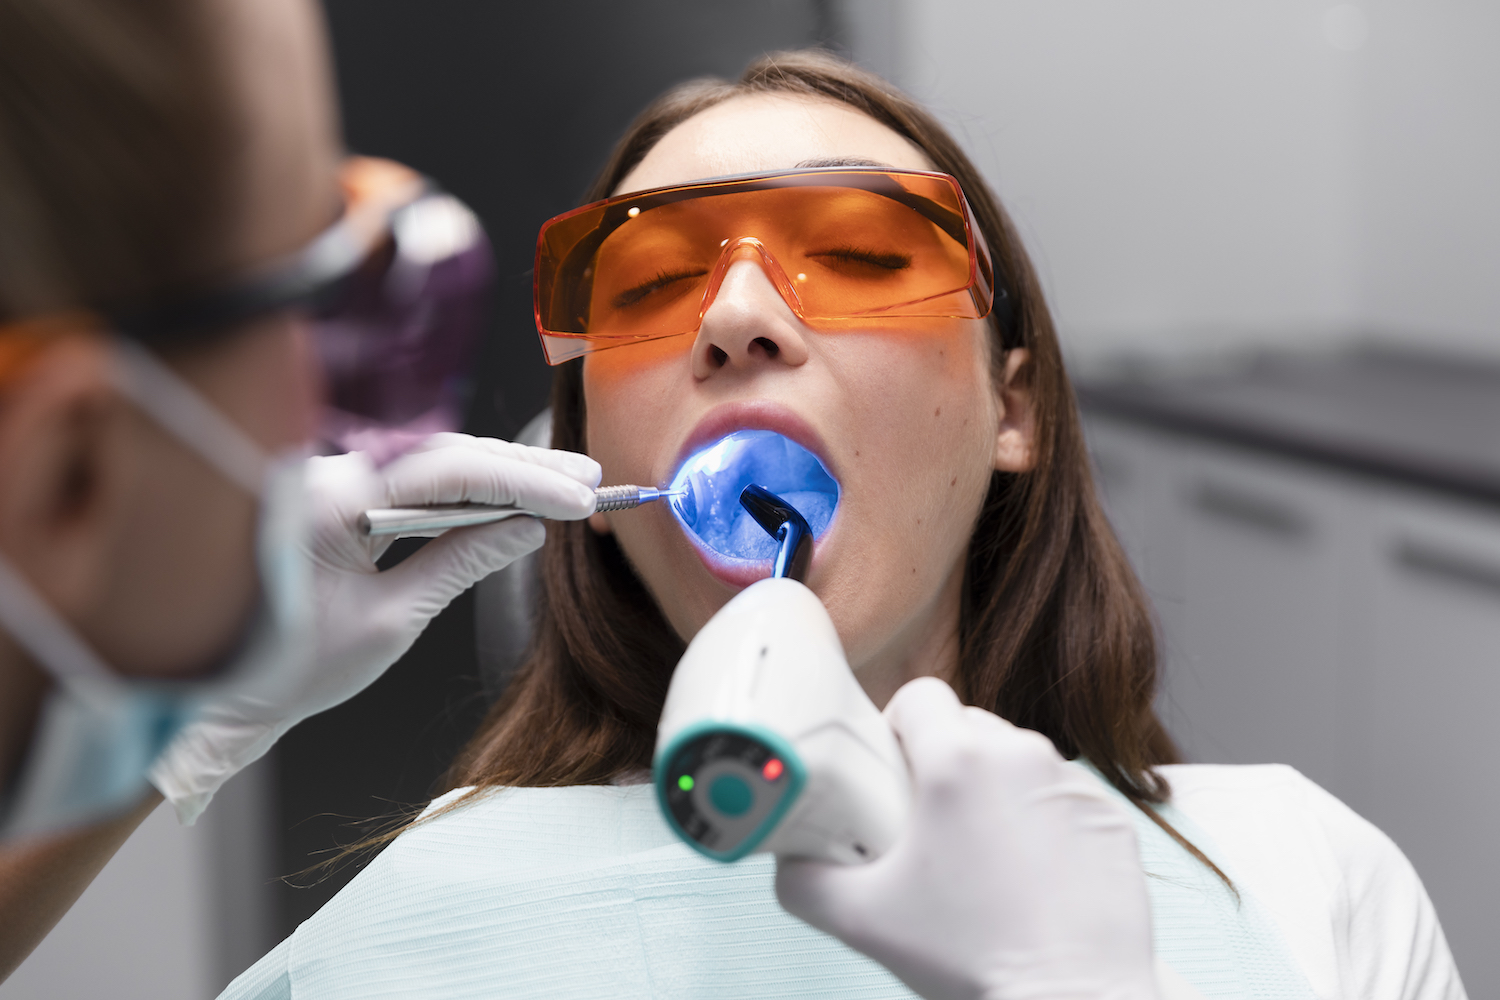 Image of woman in dental chair receiving a preventive oral cancer screening with a specialized light.